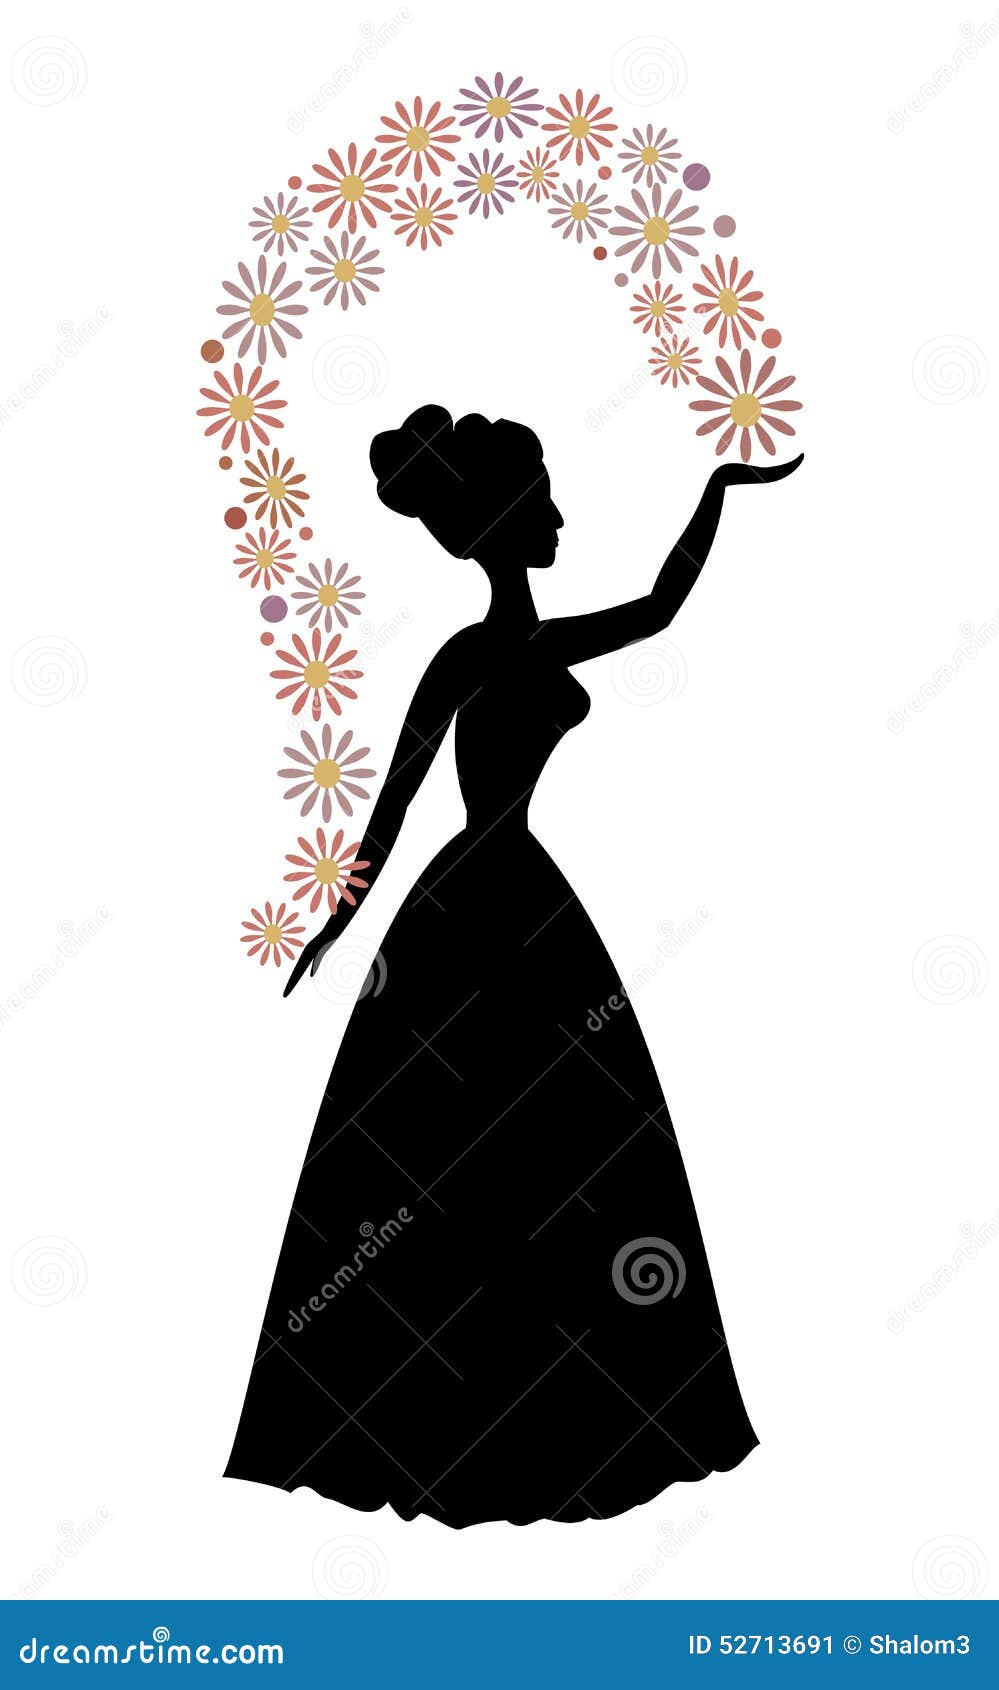 Download Vintage Vector Silhouette Of A Woman Throwing Flowers, Beautiful Decorative Motif Stock Vector ...